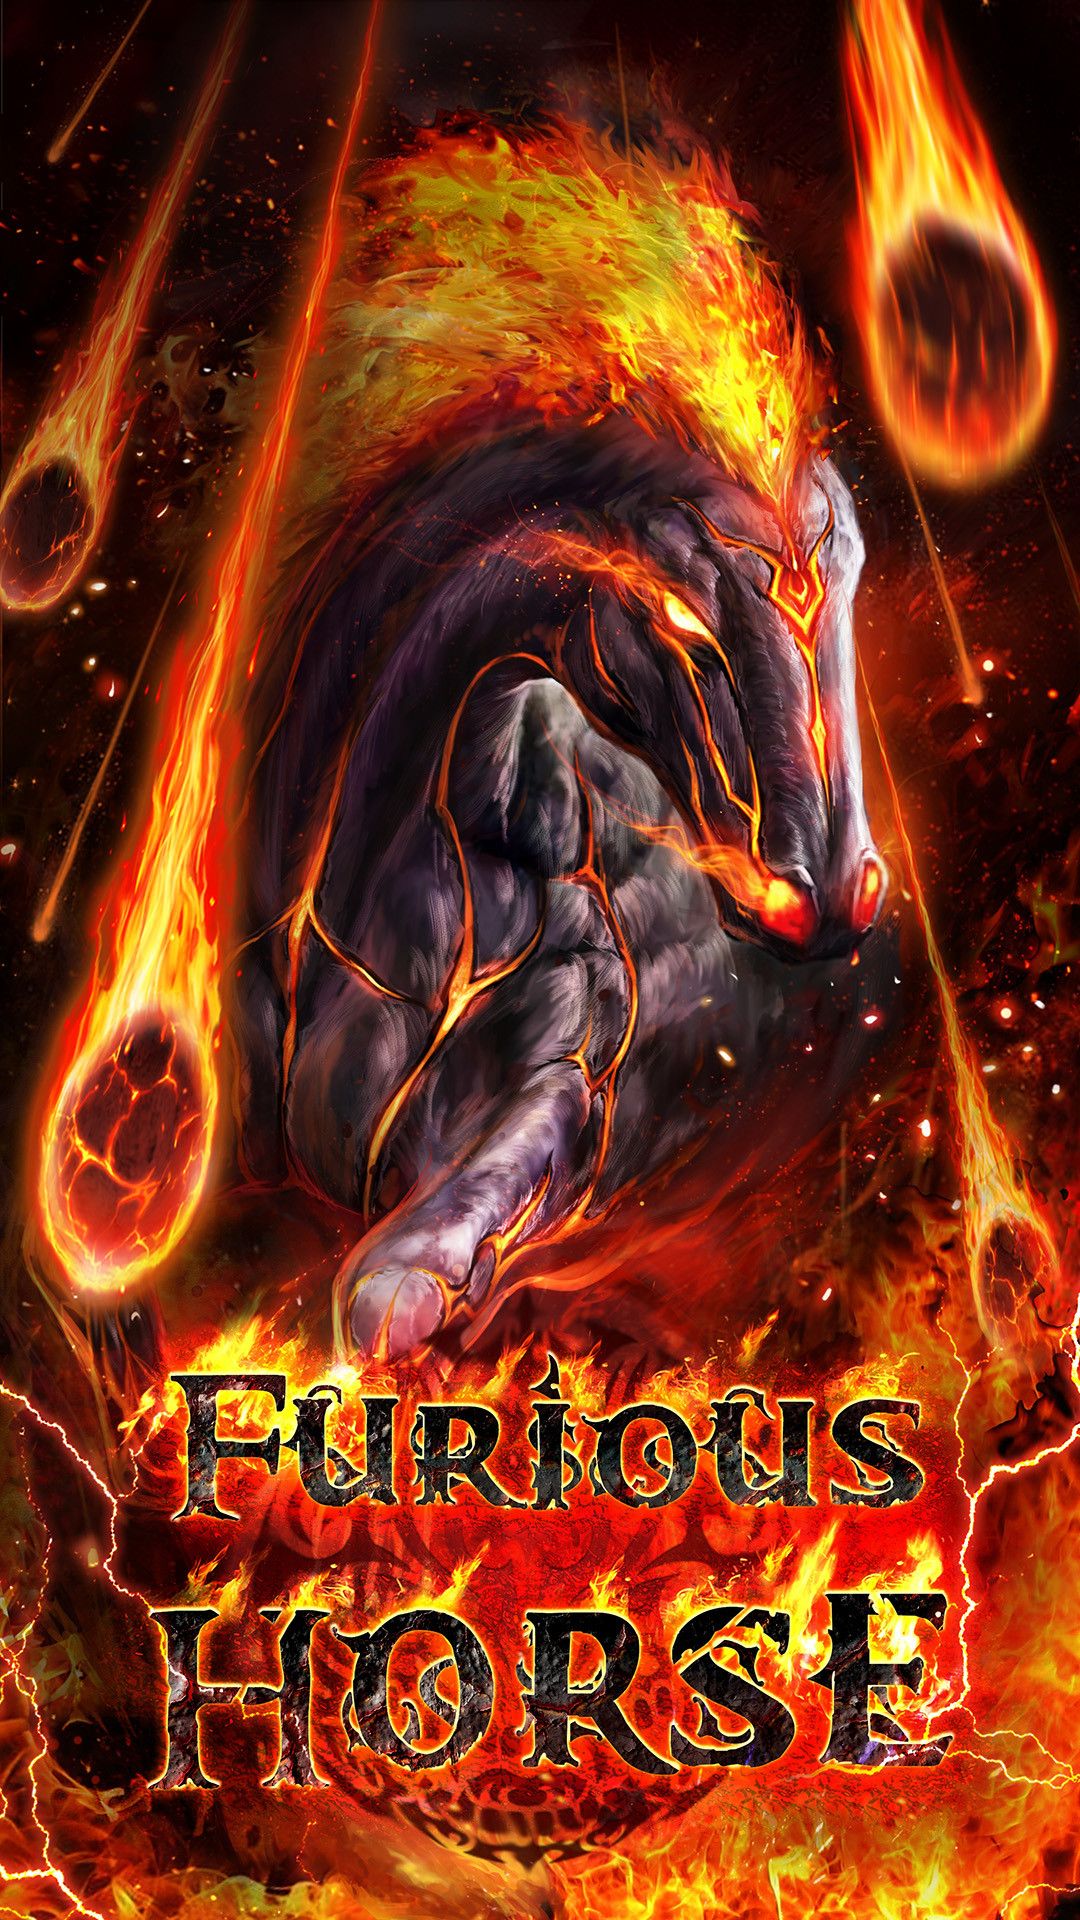 Furious Flaming Horse Live Wallpaper Android Live Wallpaper Skull Wallpapaers HD Wallpaper